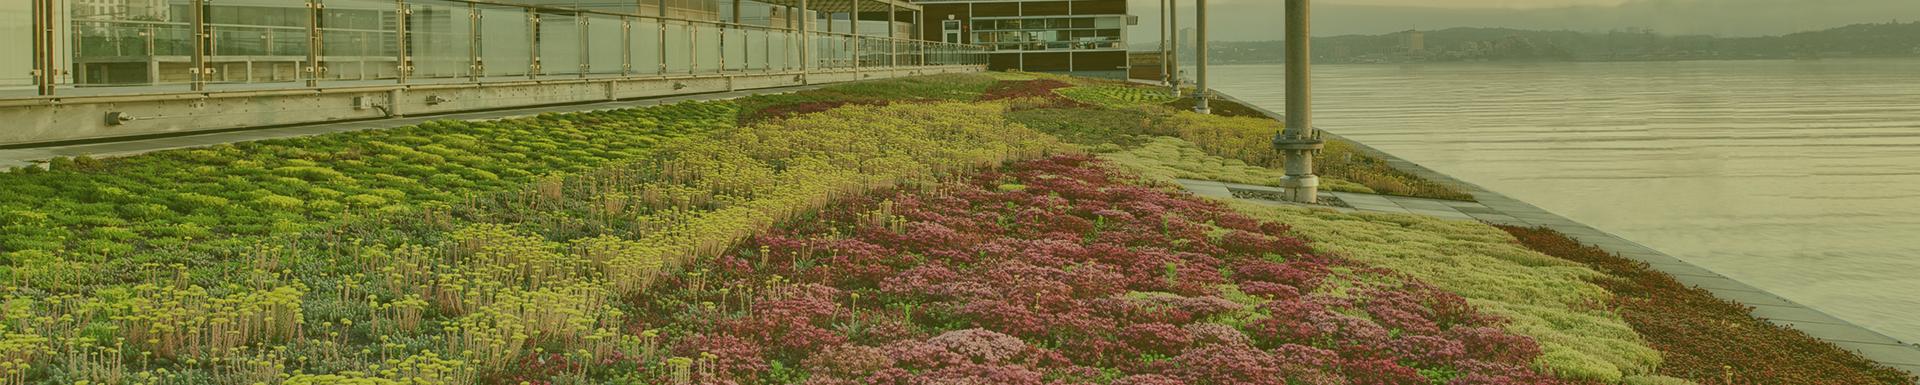 Product Green Roofs | SOPREMA image